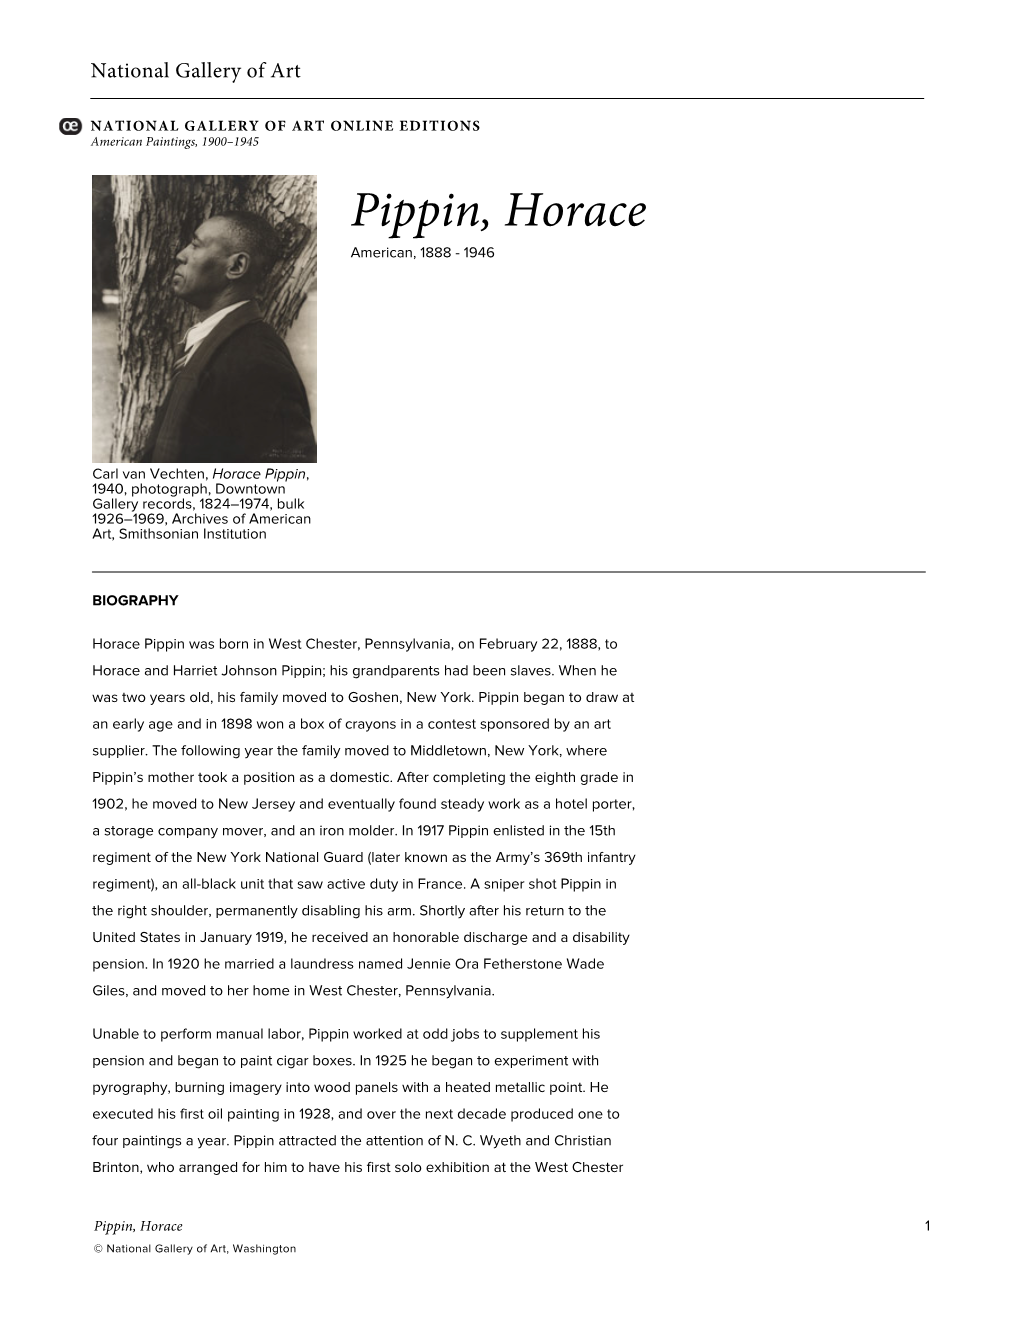 Pippin, Horace American, 1888 - 1946